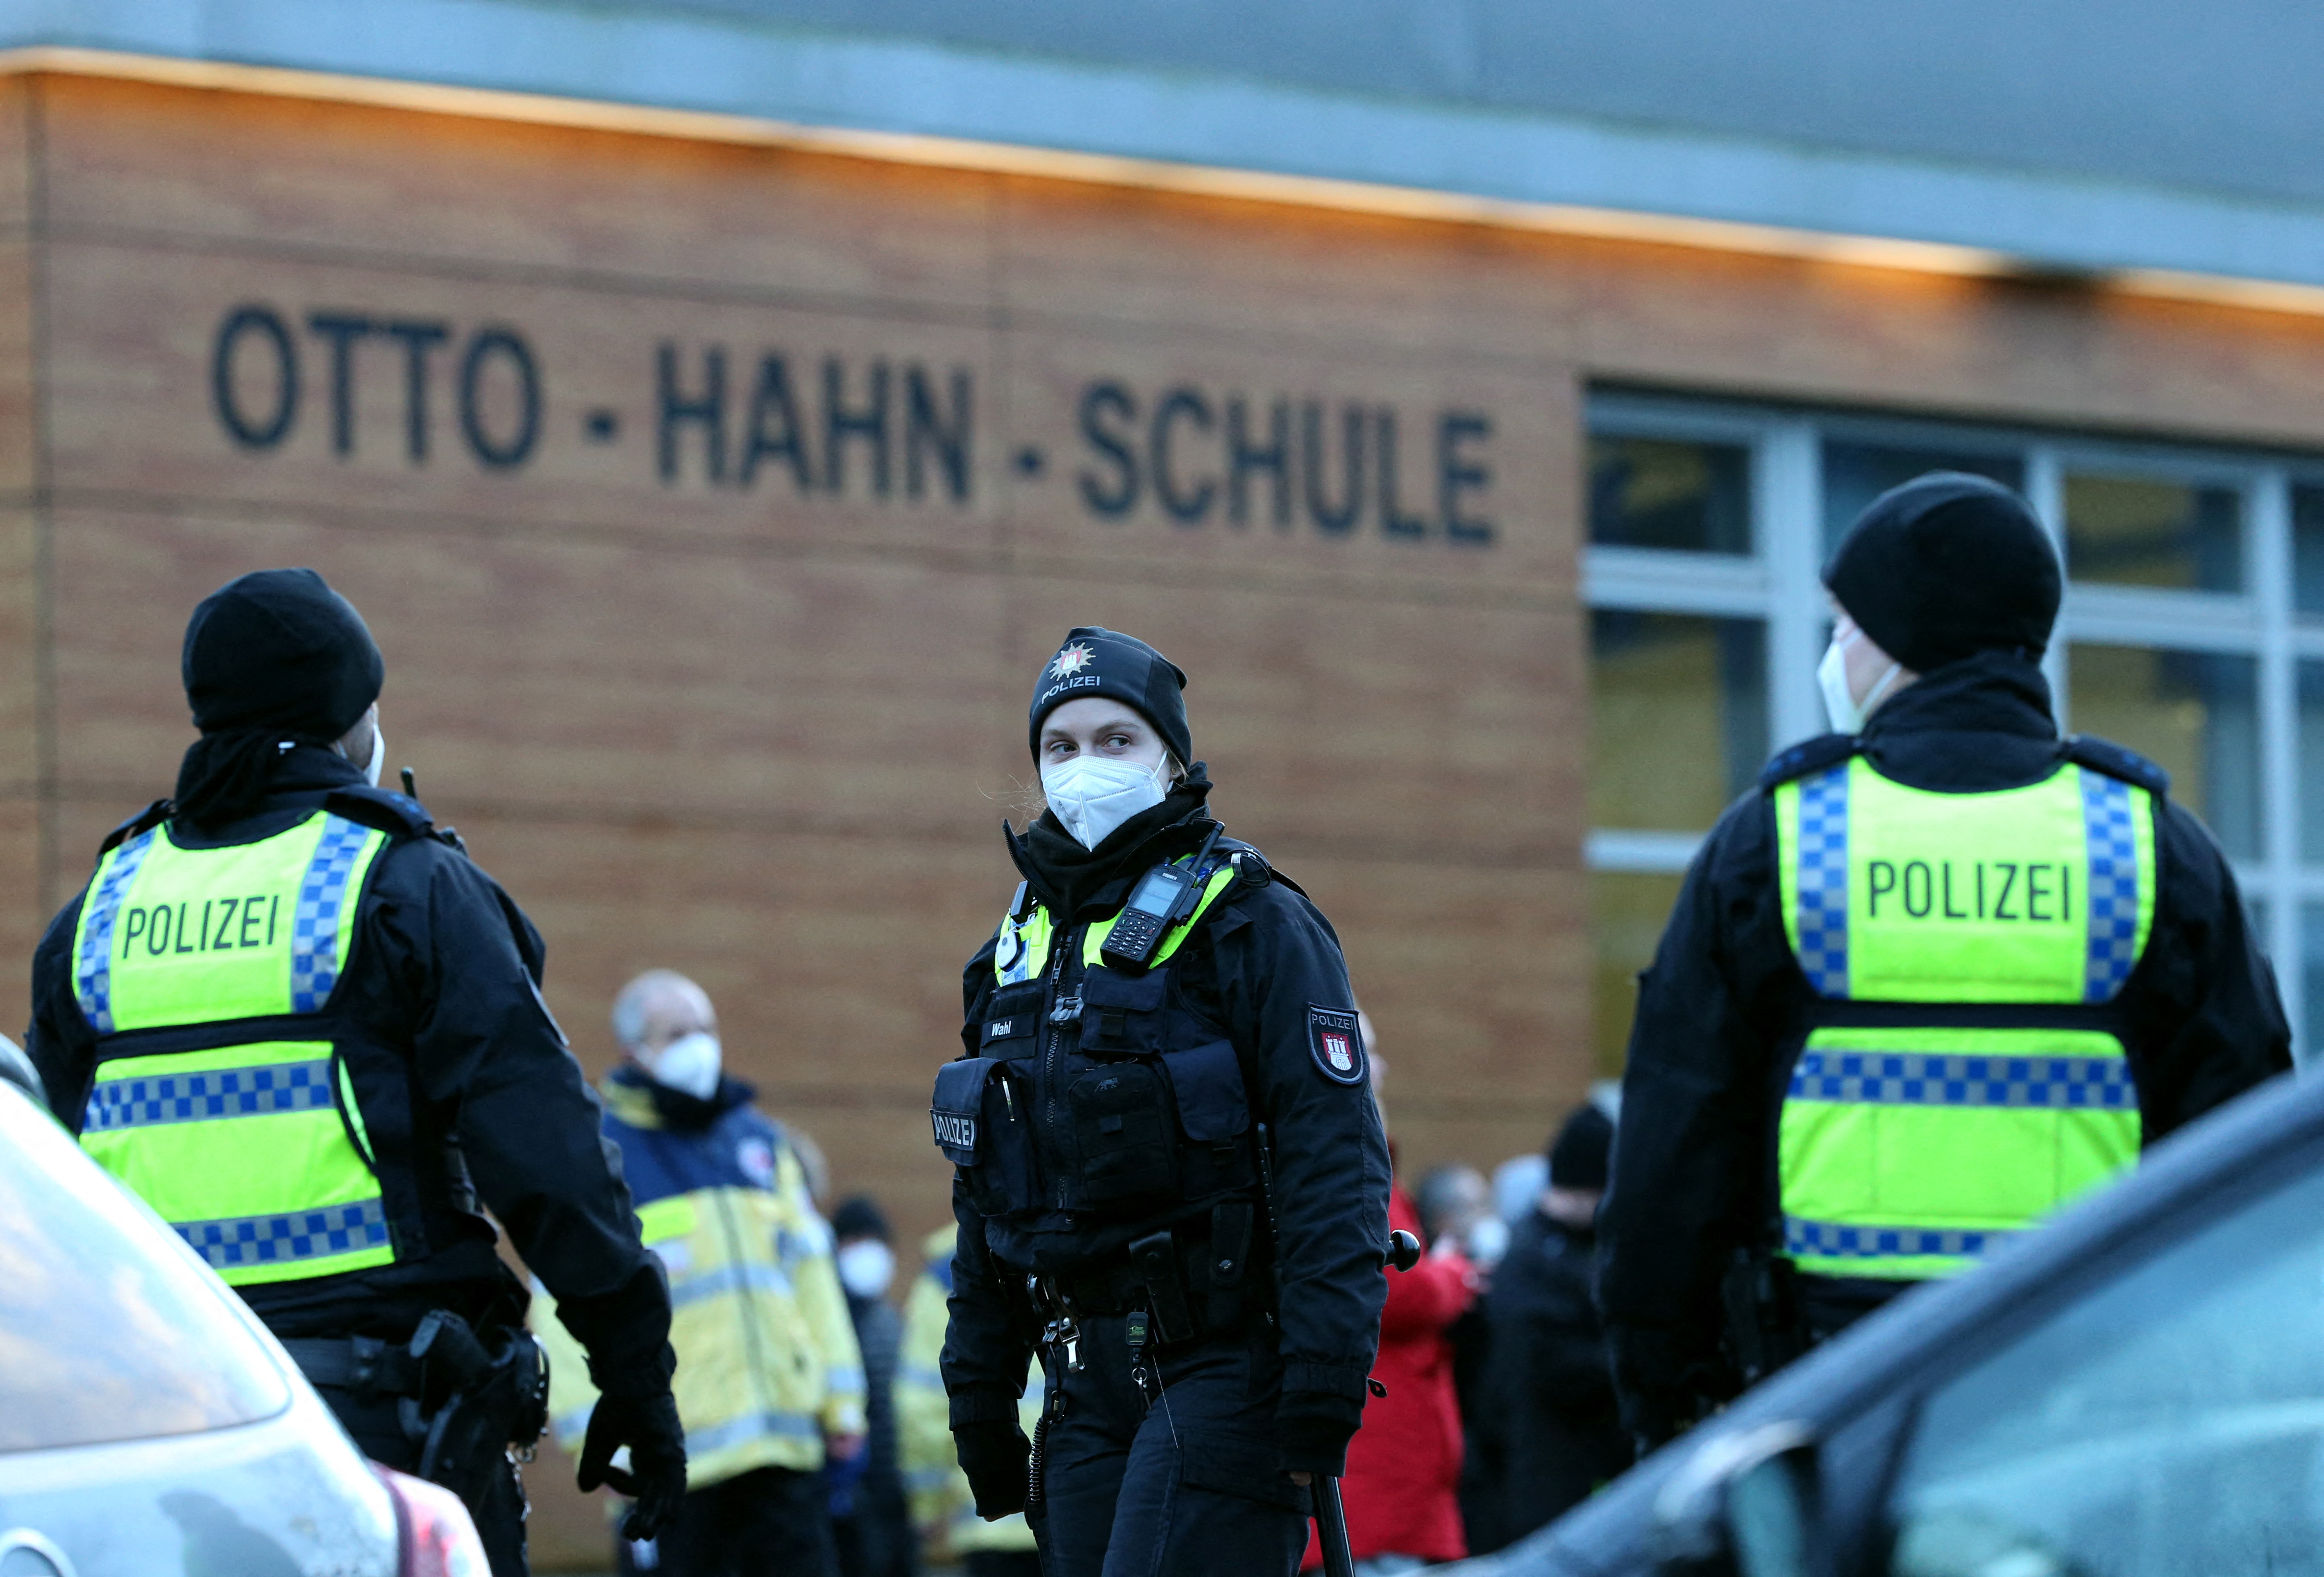 Hamburg police search school after report of armed youth